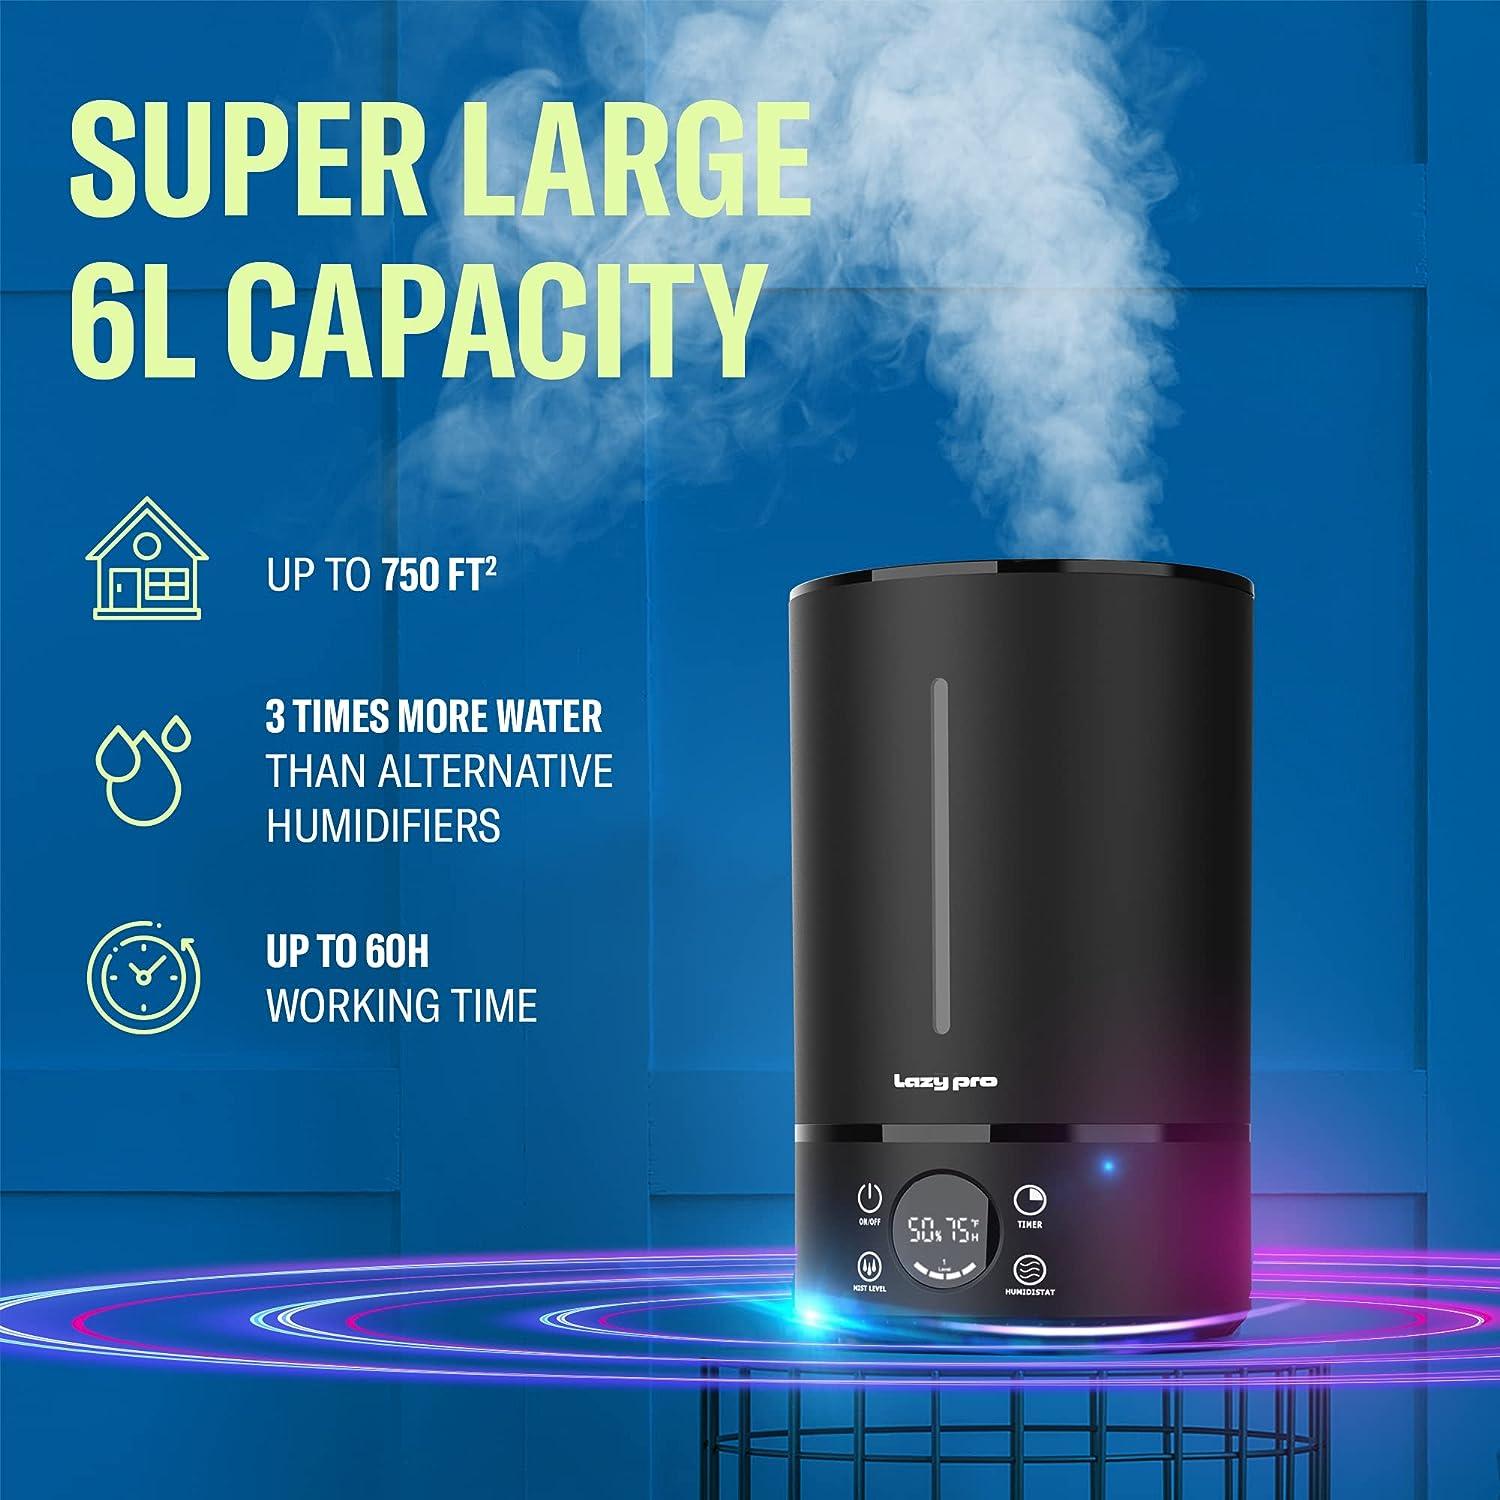 LazyClimate - 6L Large Room Home Ultrasonic Humidifier: Top Fill, 6L Capacity, 360° Mist, Quiet for Babies - Lazy Pro